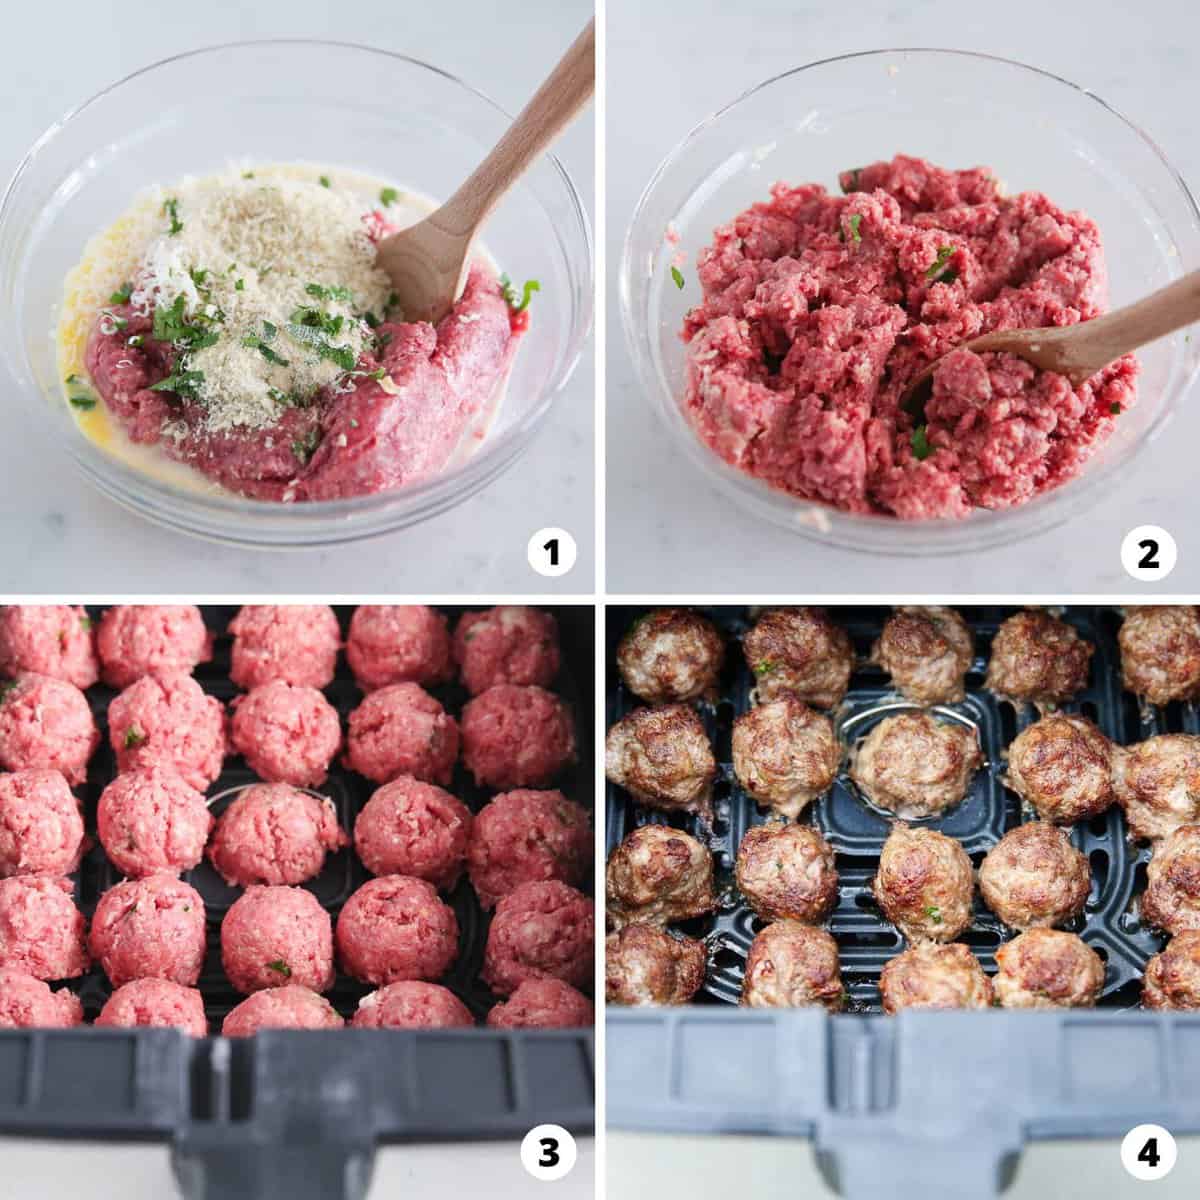 Showing how to make air fryer meatballs in a 4 step collage.